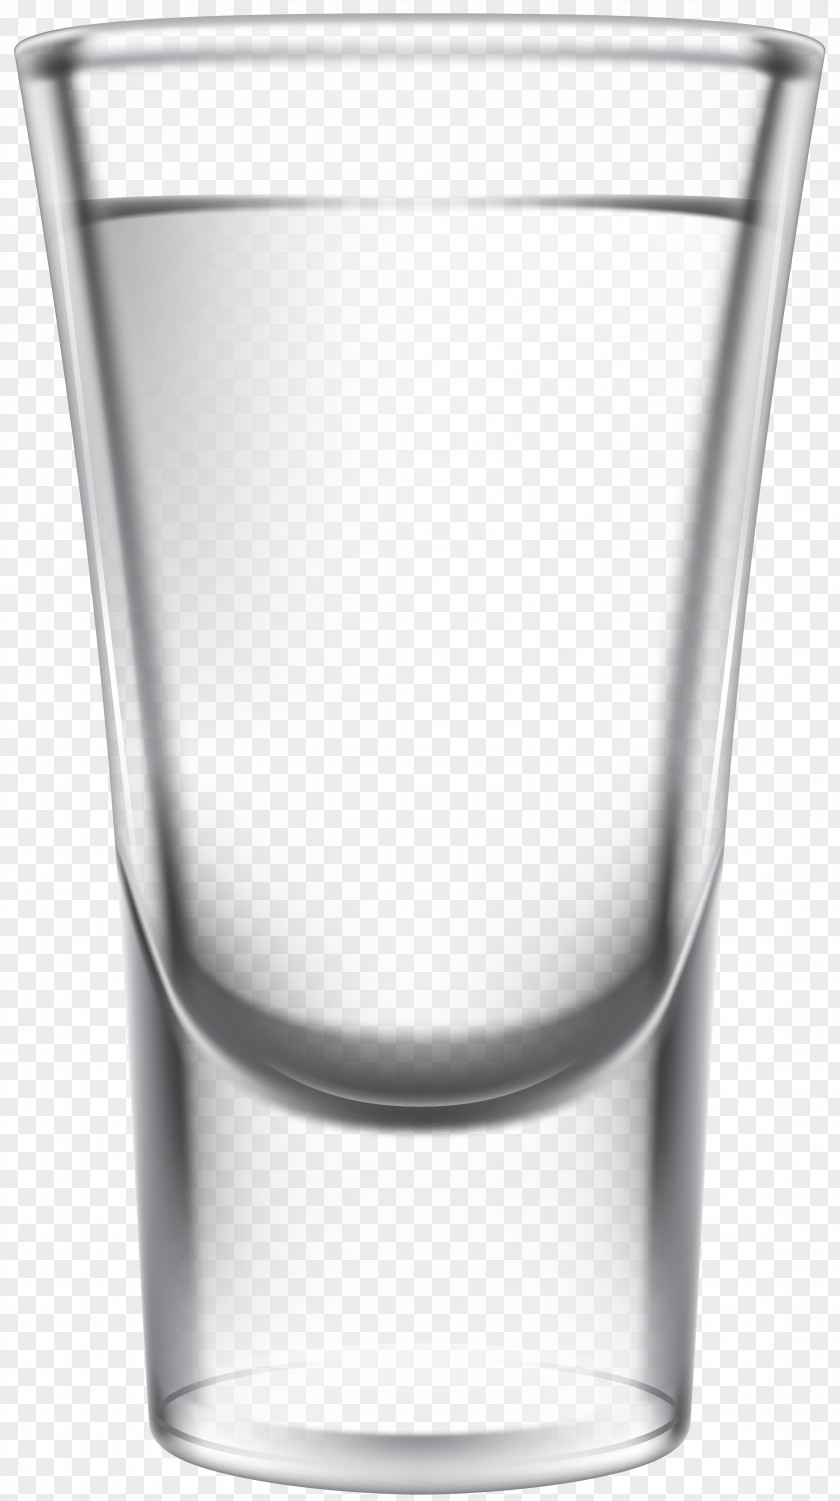 Tequila Glass Clip Art Image Highball Pint Old Fashioned Cup PNG